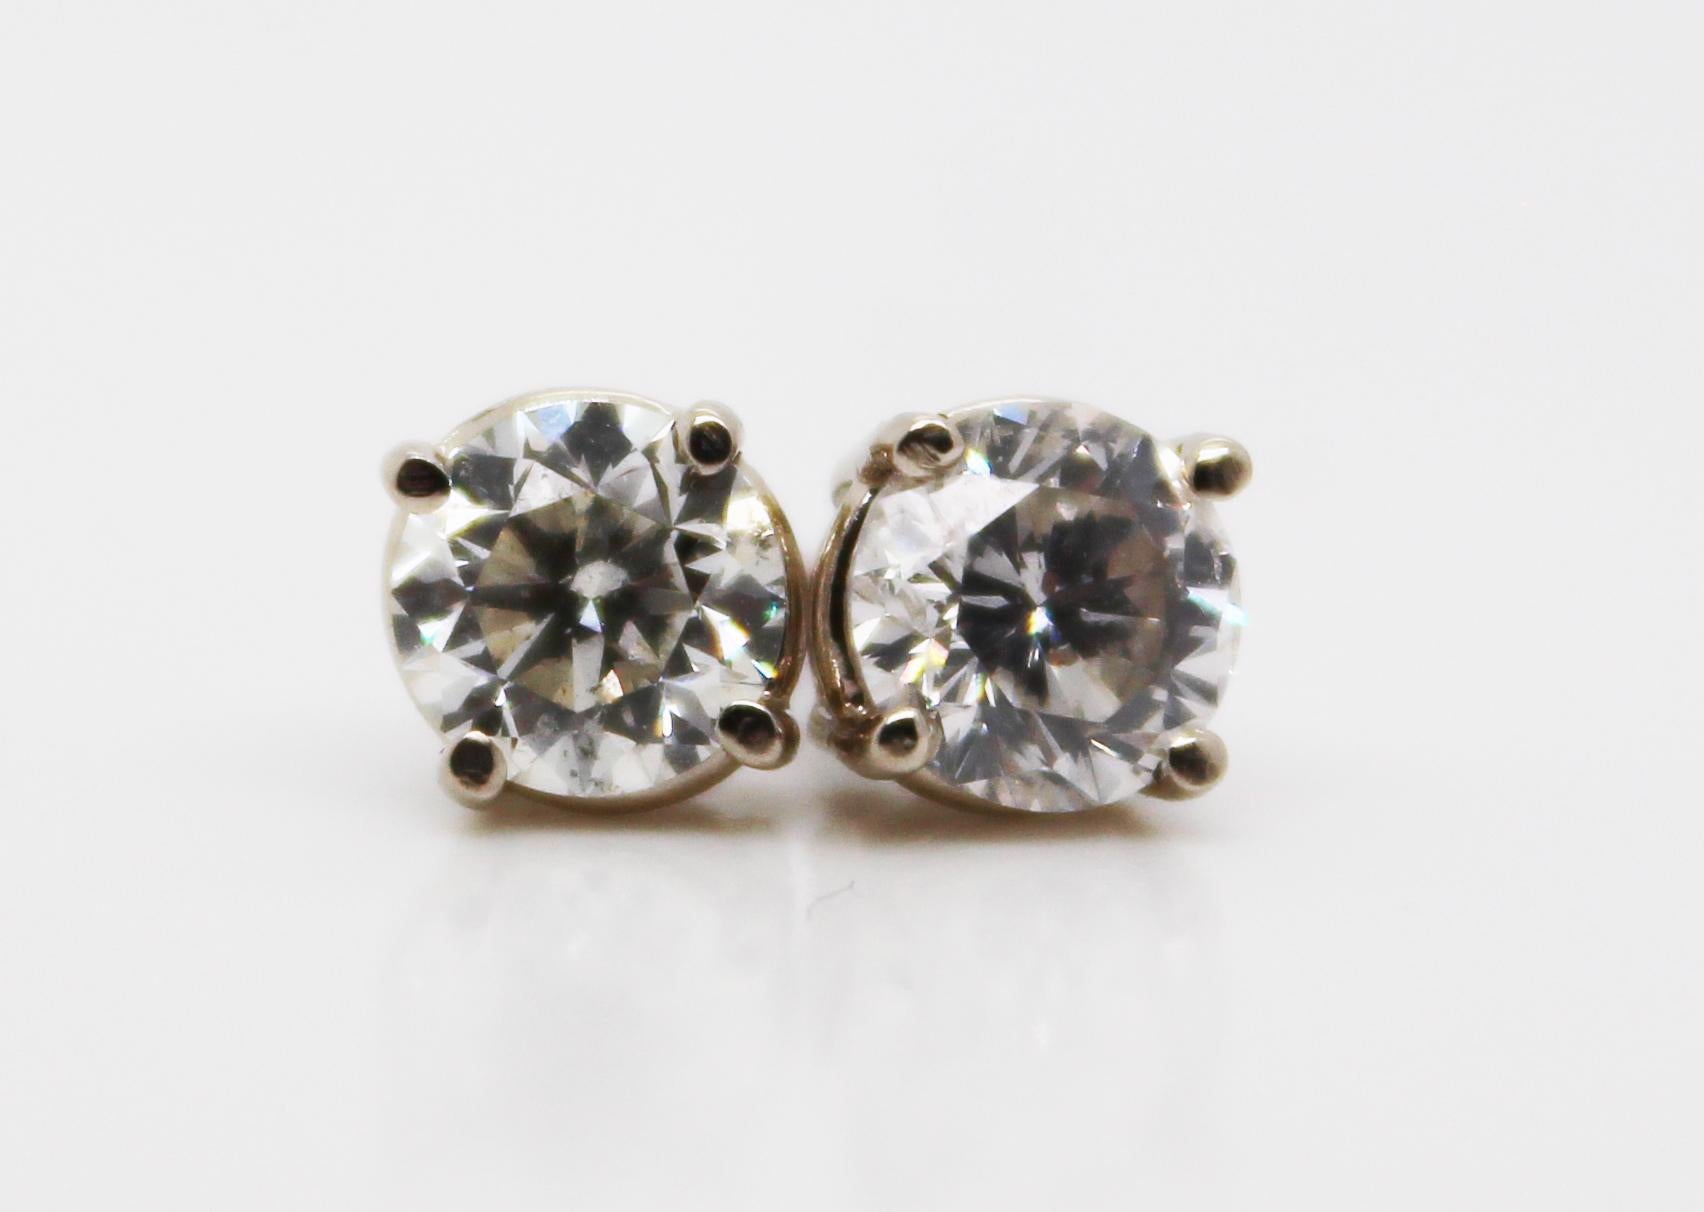 These stunning stud earrings are in 14k white gold and feature breathtaking white diamond centers! The diamonds are almost perfectly matched and big enough for their sparkle to be seen from across the room! These earrings are the diamond staple that